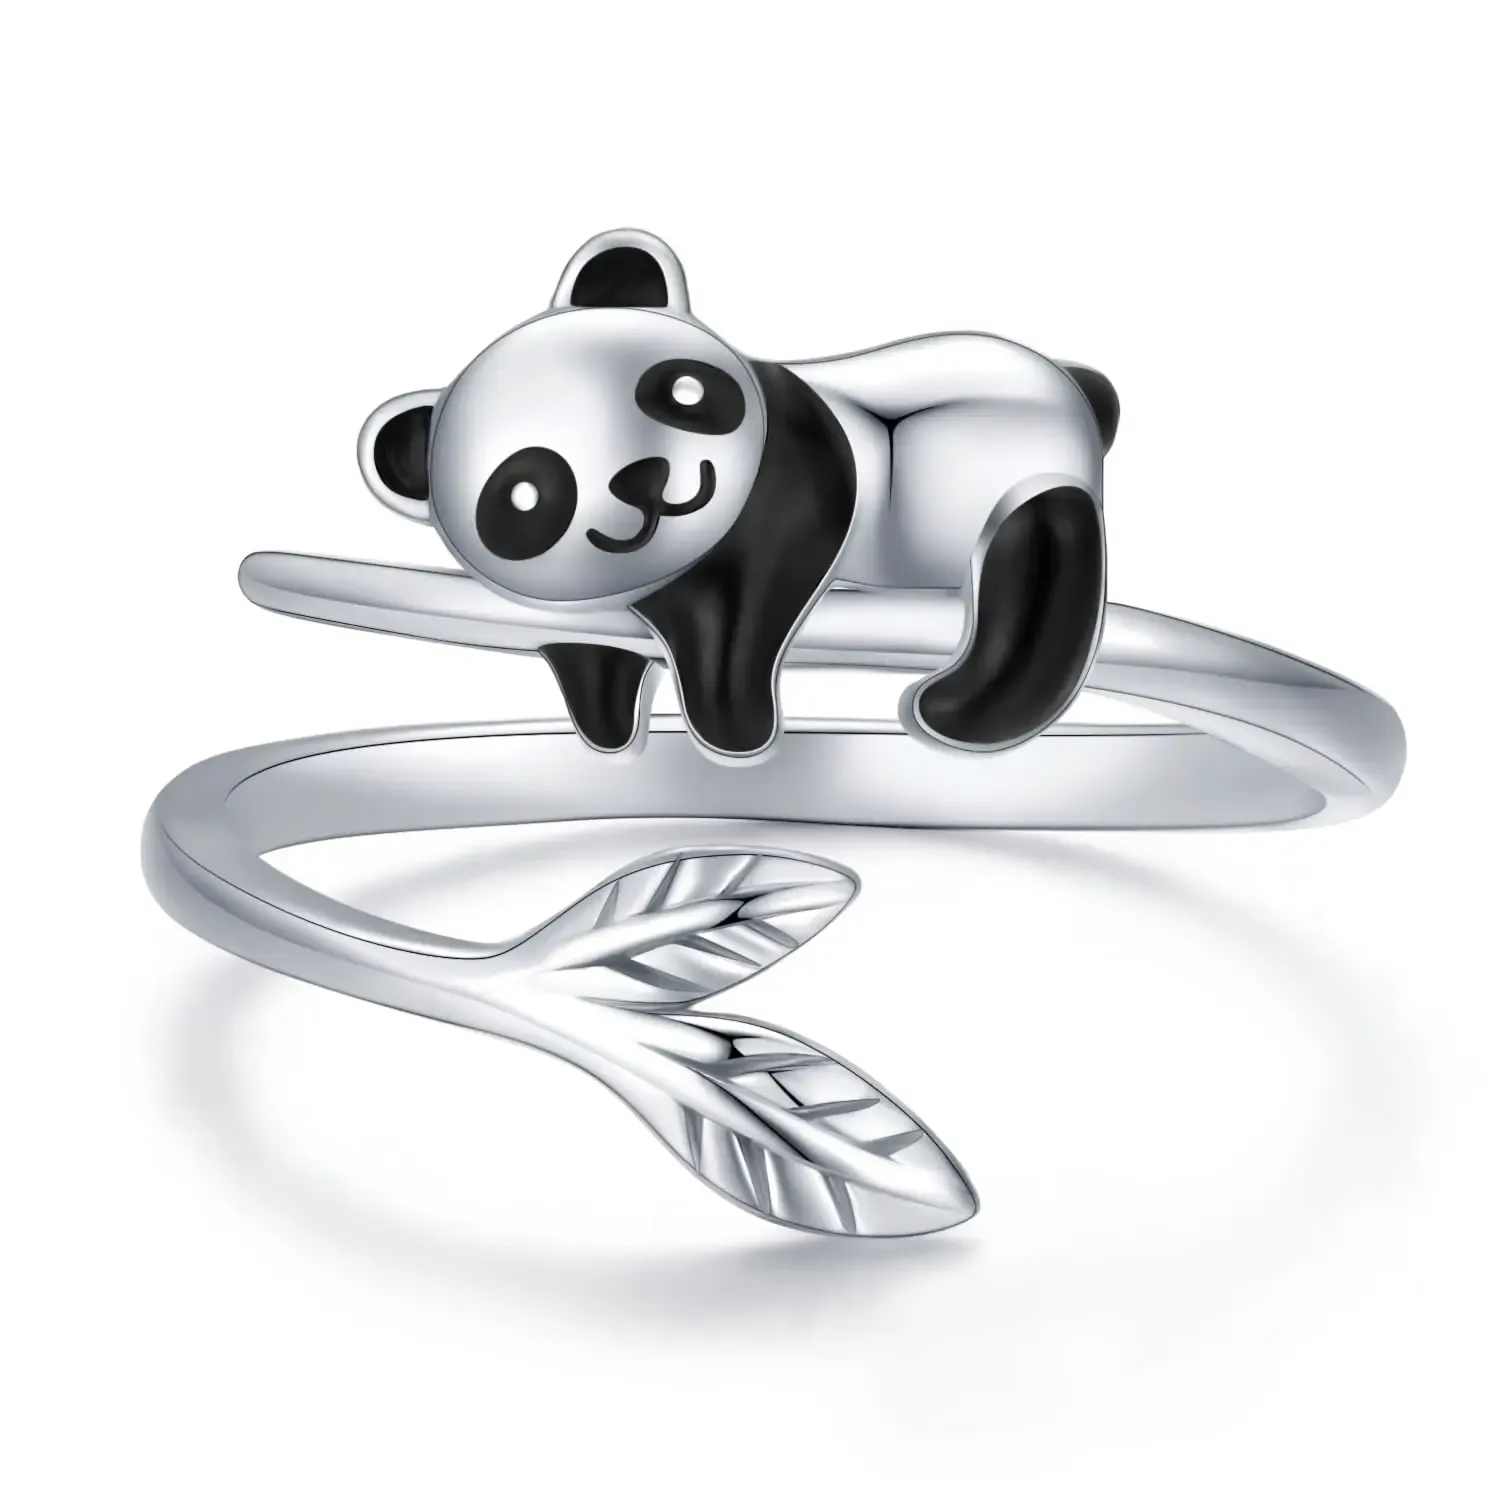 Bands 2New Harong Creative New Trend Lifelike Cute Panda Bamboo Ring Animal Open Rings for Girl Women Men Party Jewelry Gift